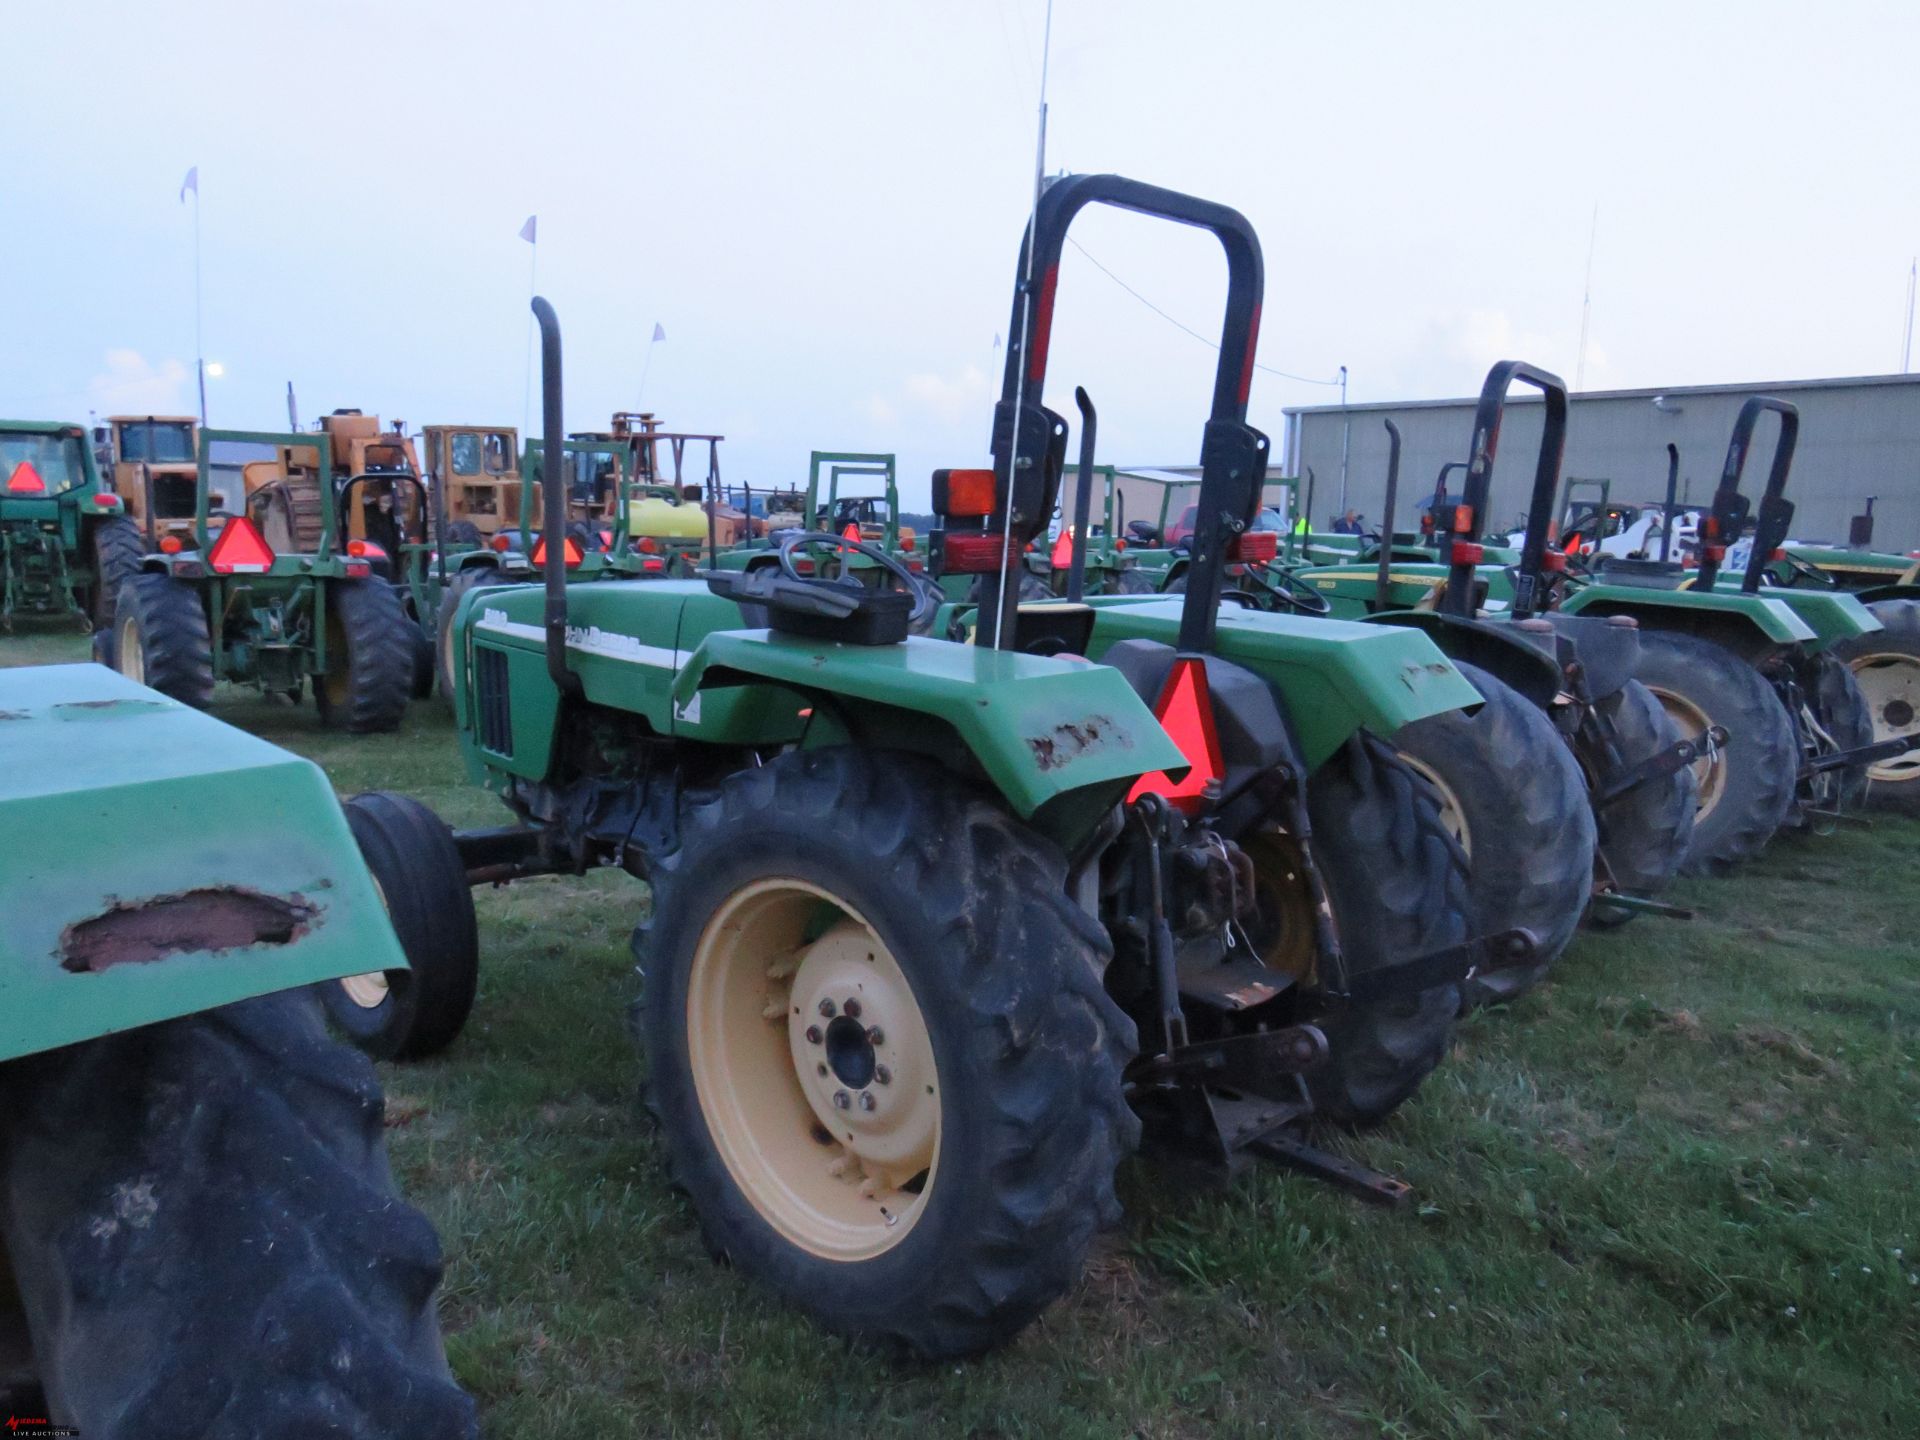 2007 JOHN DEERE 5103 TRACTOR, 3PT, NO TOP LINK, HAS PTO, 13.6-28 REAR TIRES, HOURS NOT AVAILABLE - Image 4 of 8